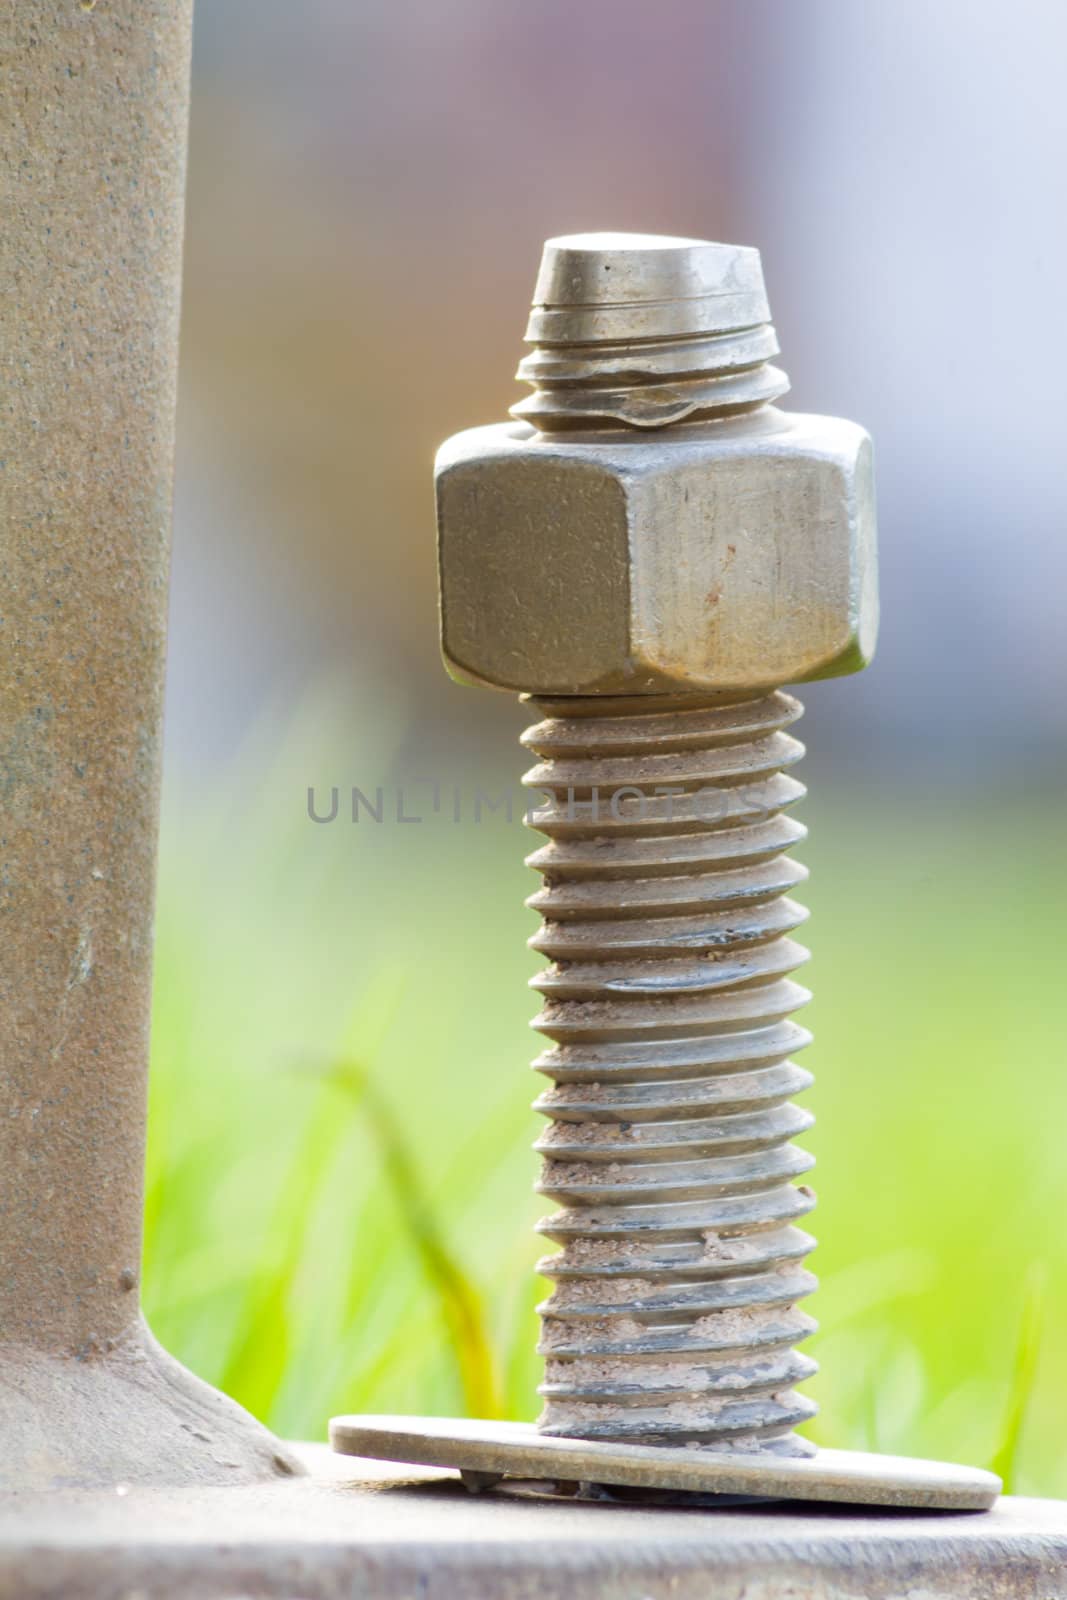 Upright Lag Bolt, Nut, and Washer by wolterk